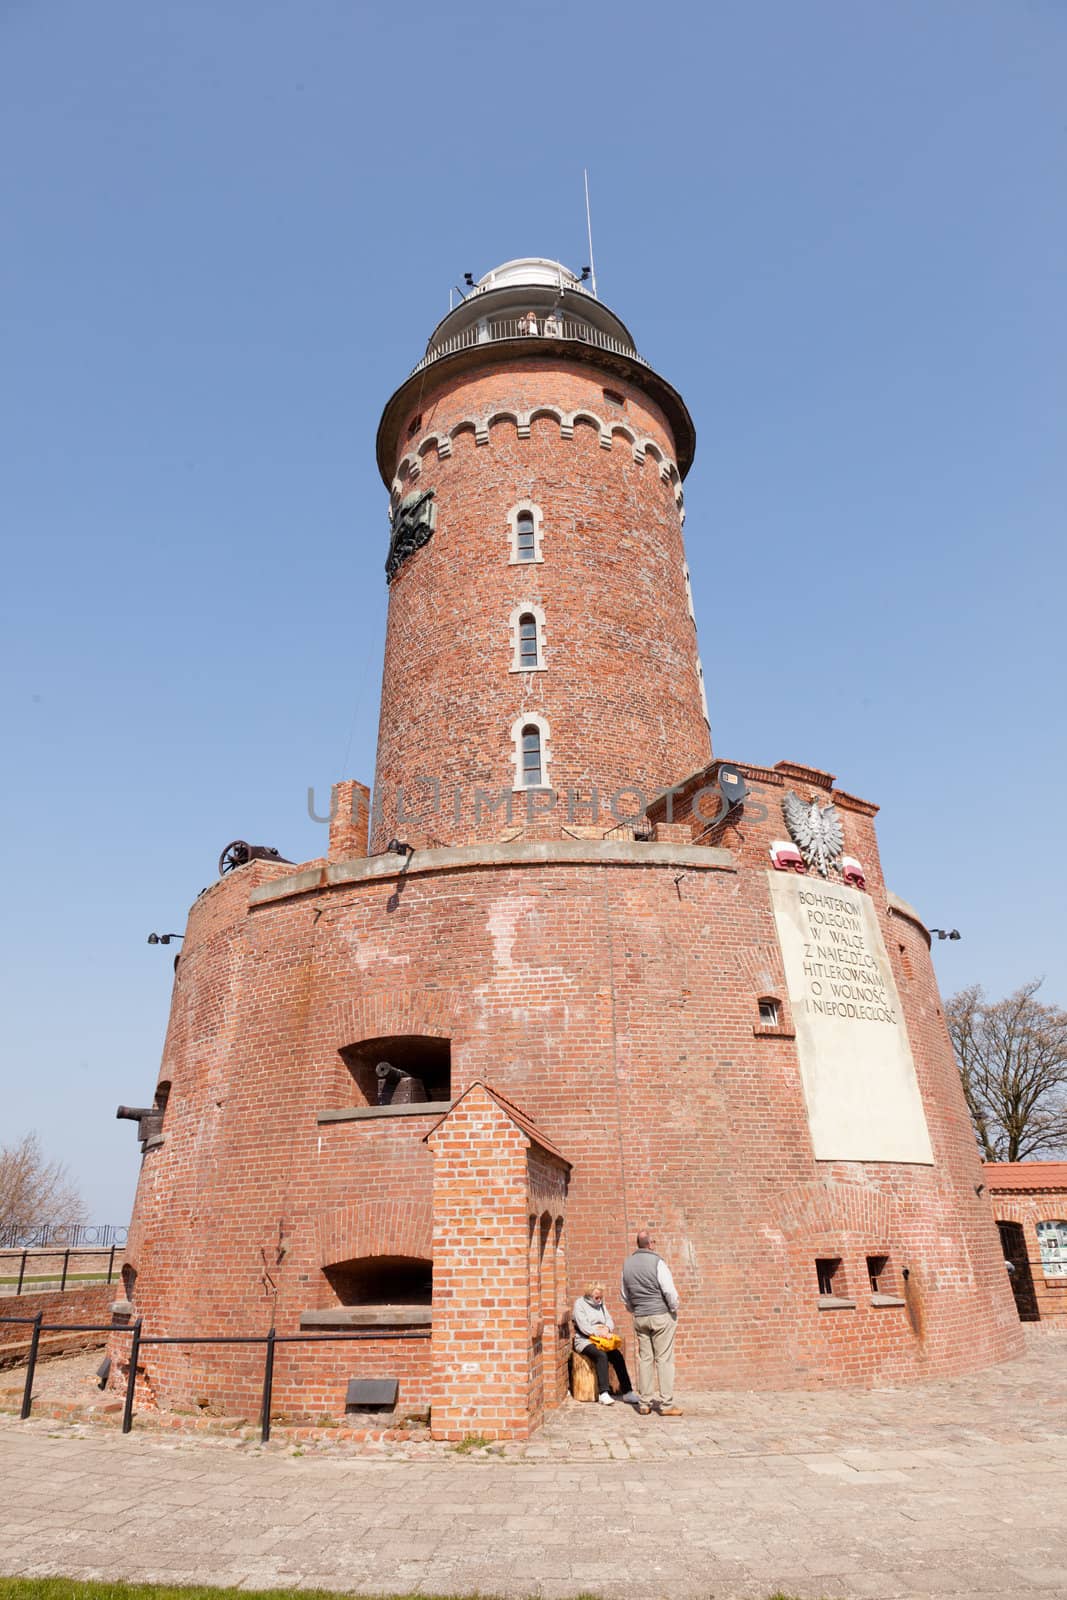 The lighthouse was built in 1945 on the ruins of the fort from the eighteenth century.